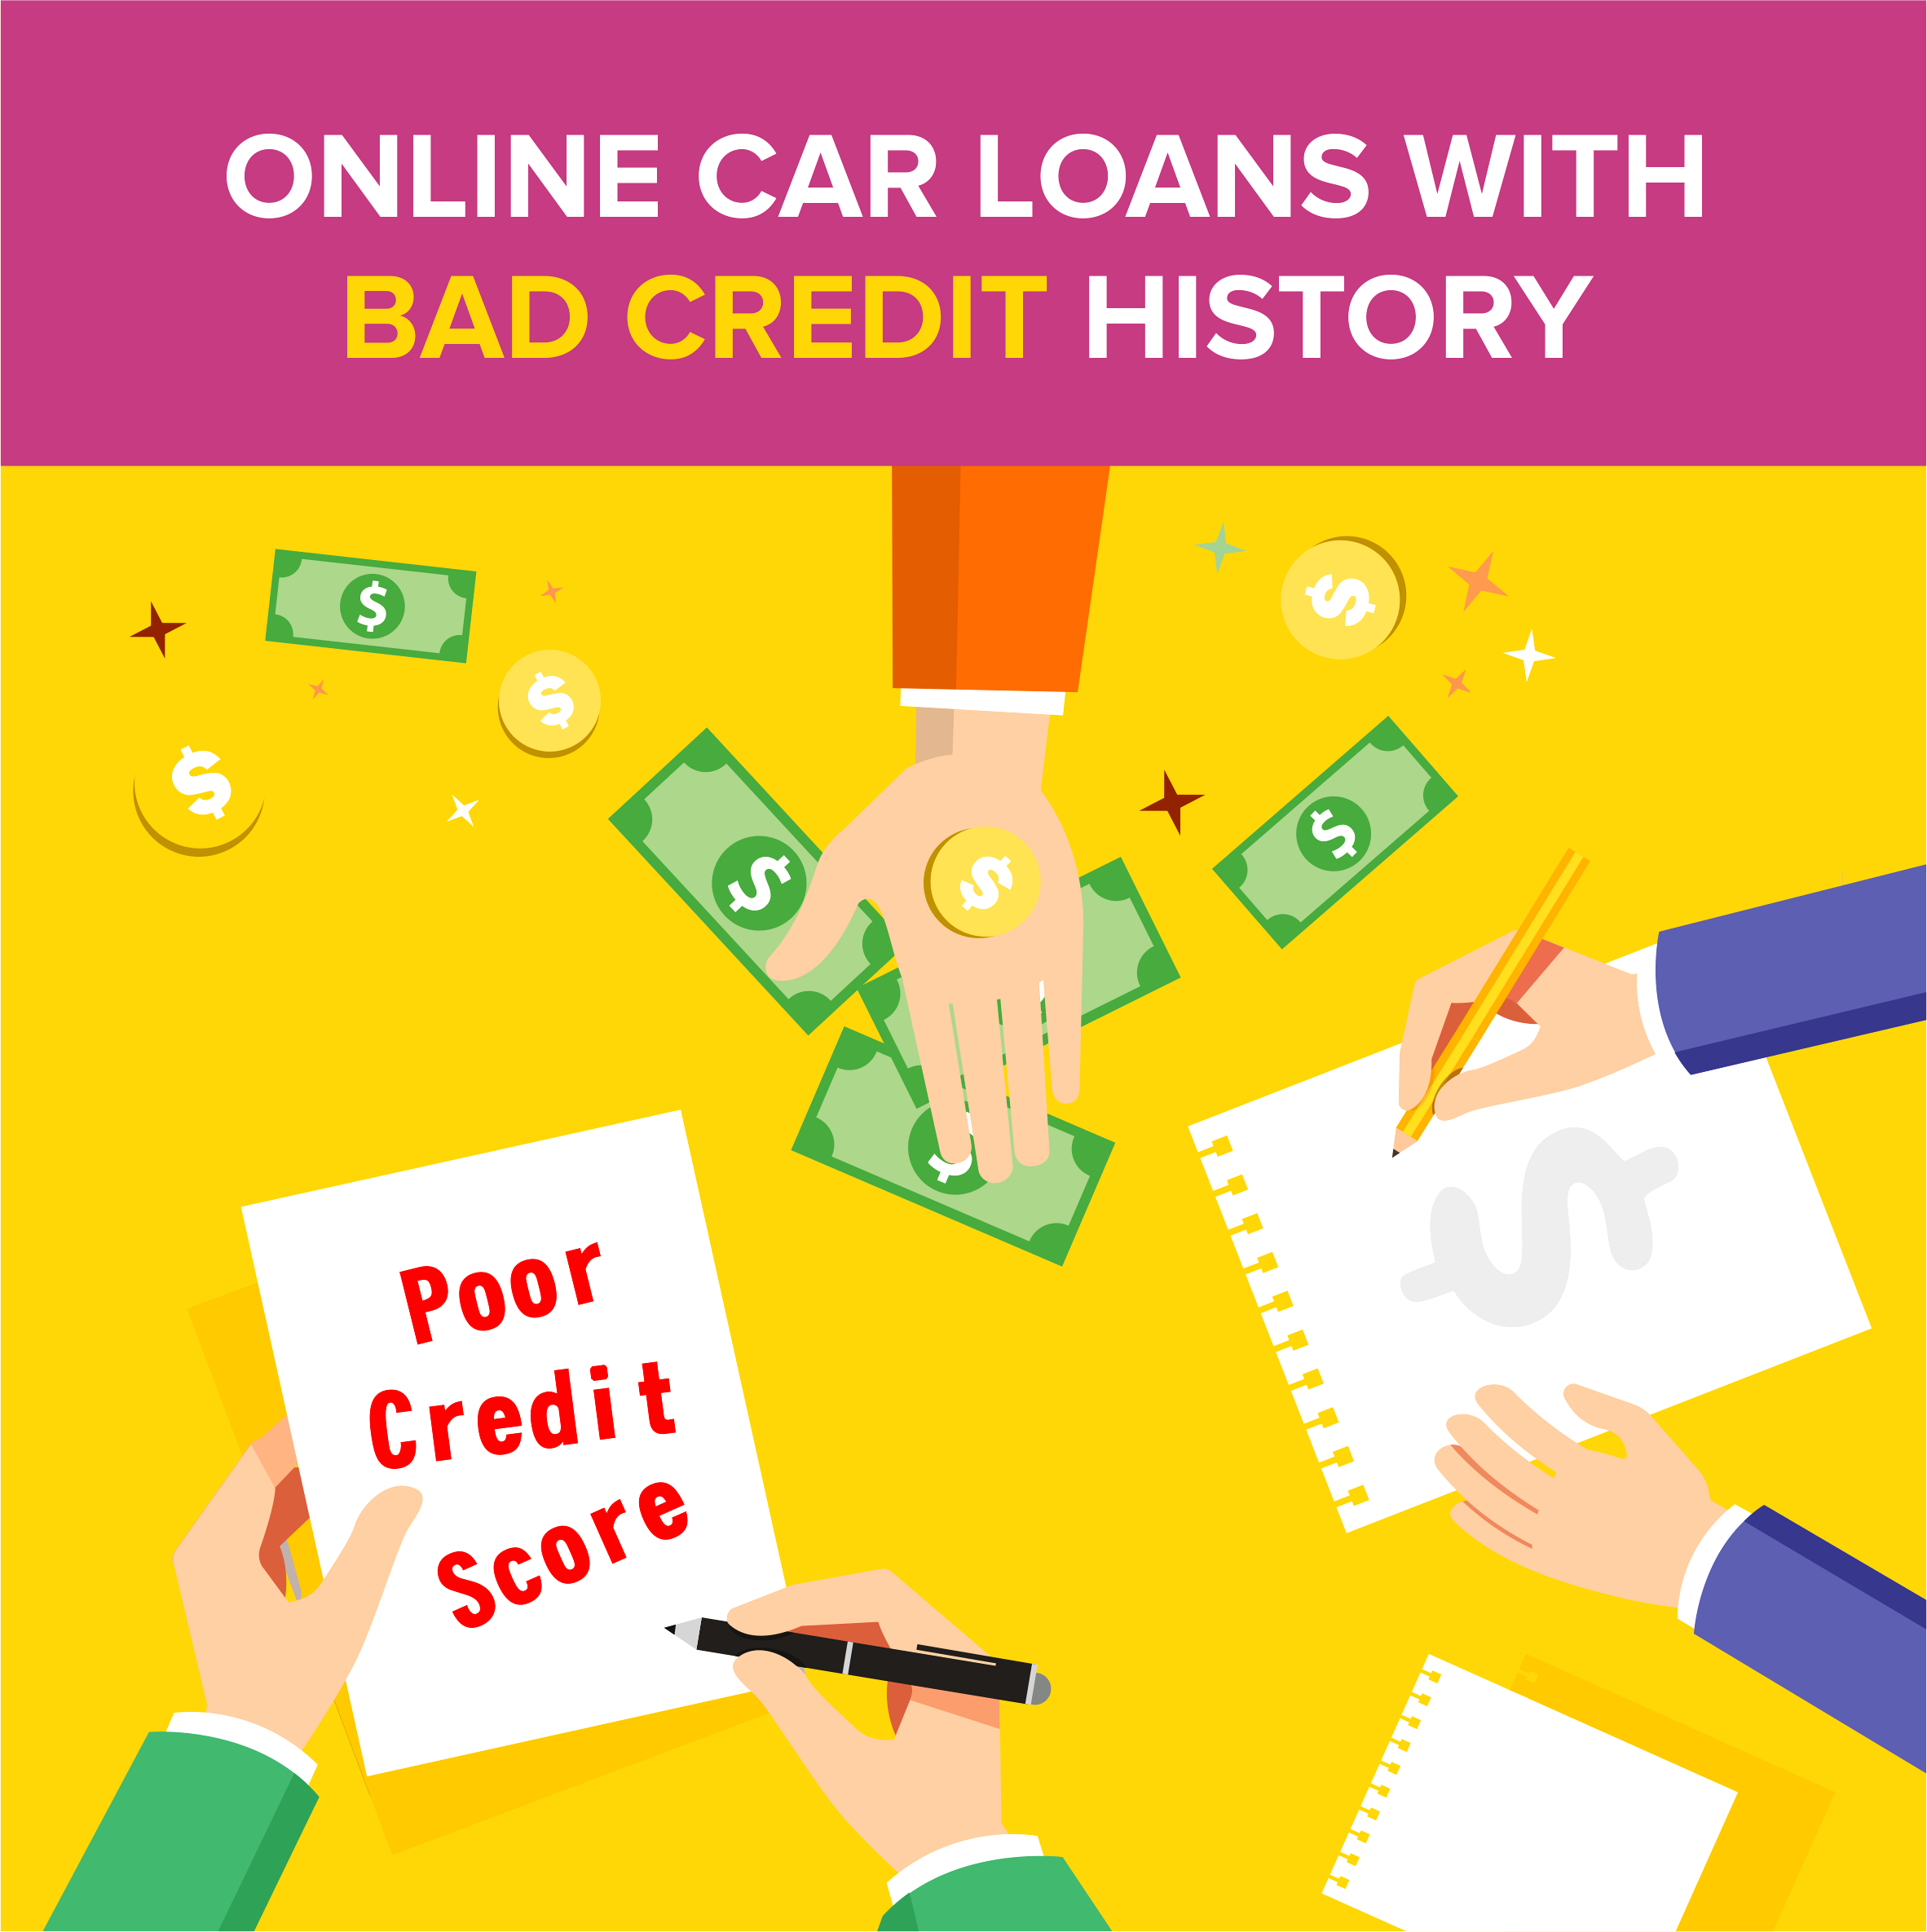 Online Car Loans with Bad Credit History